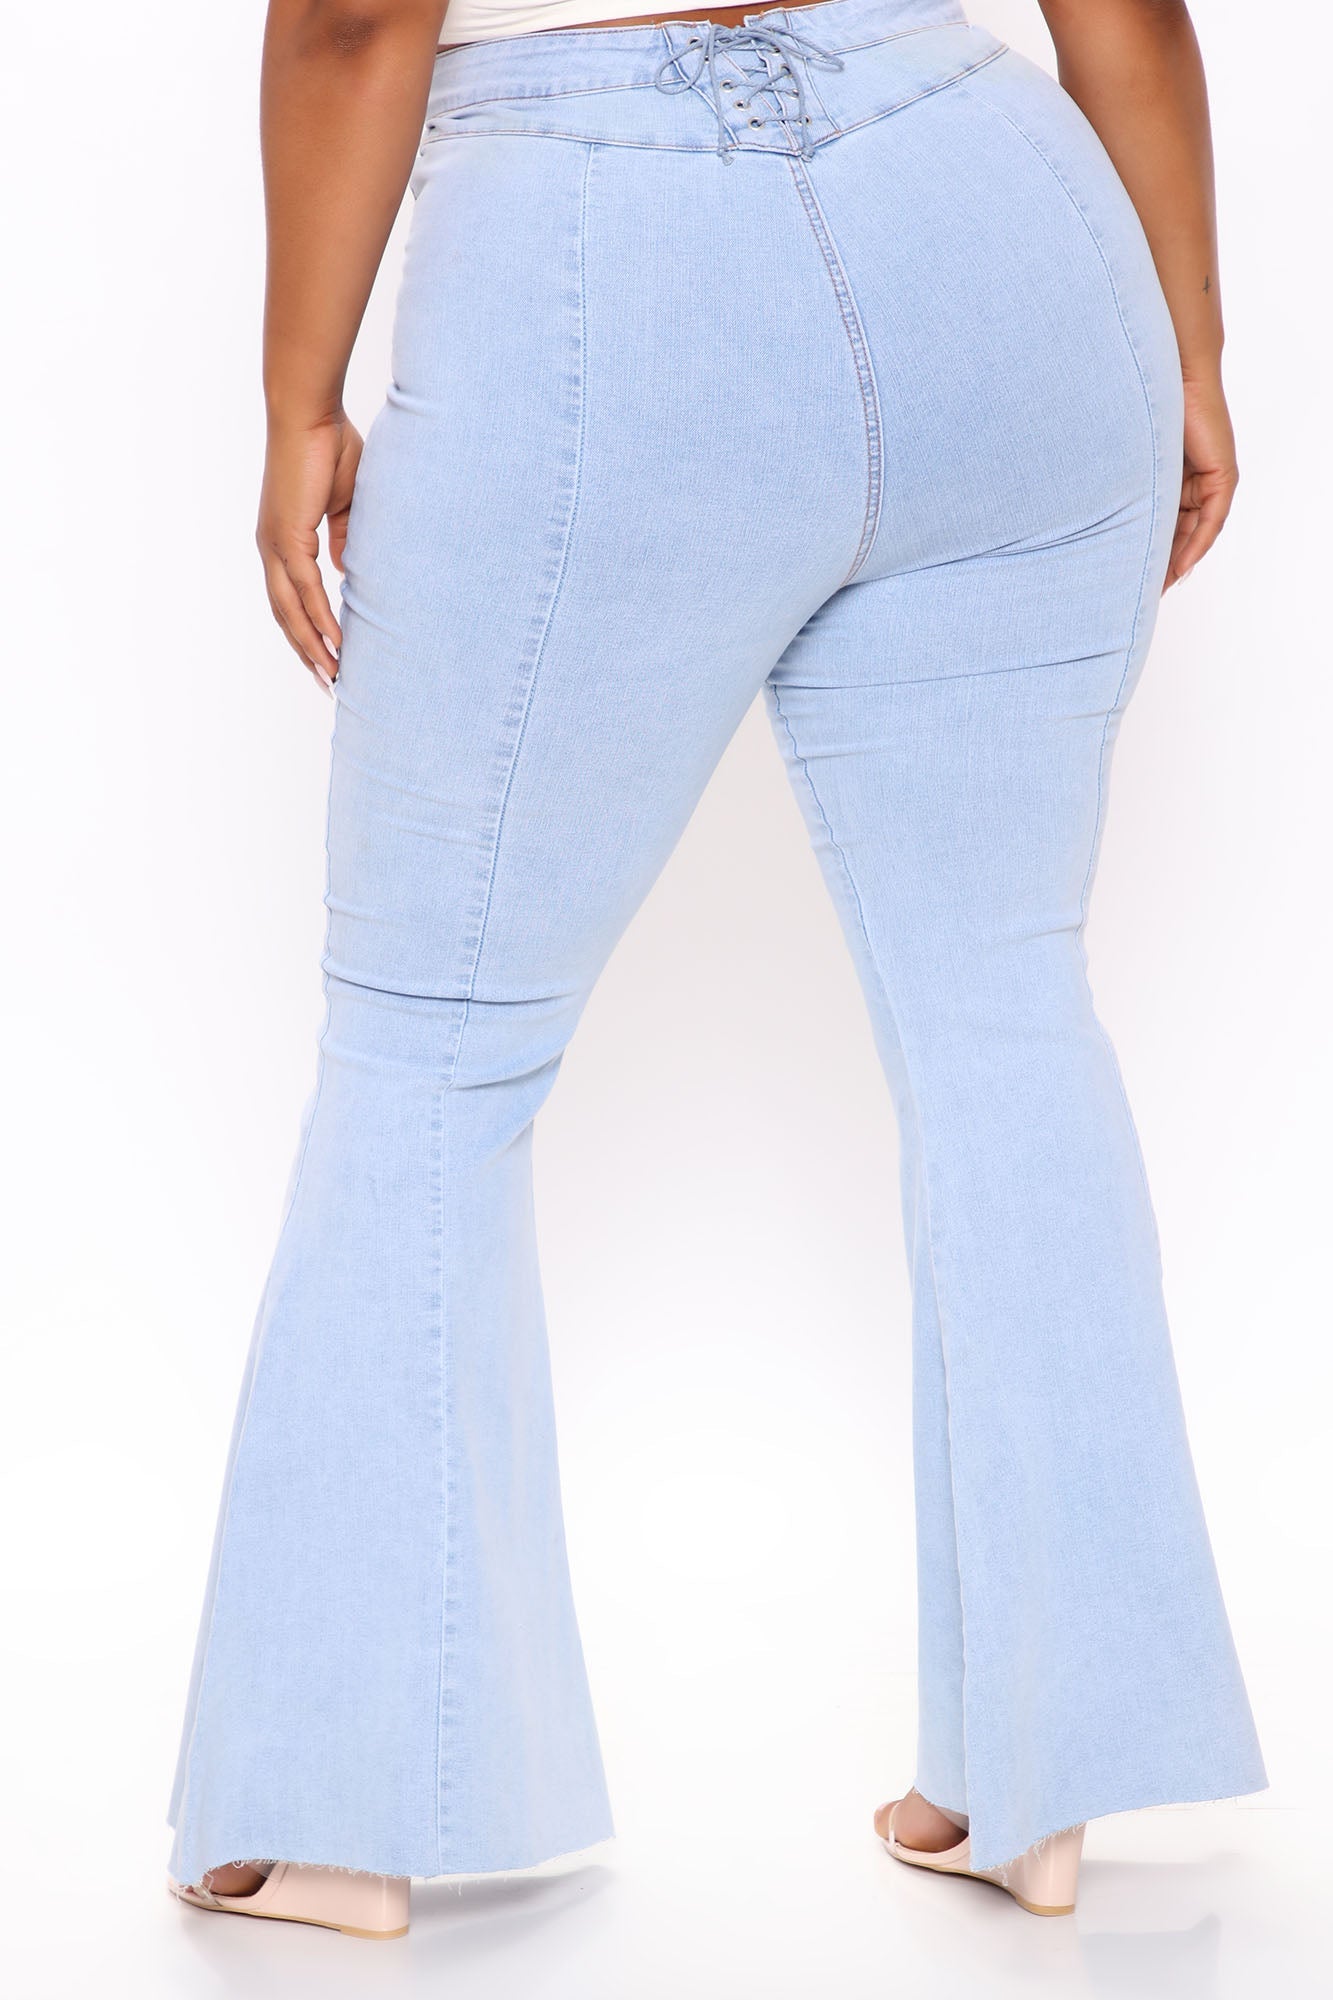 Feelin' Good Lace Up Stretch Flare Jeans - Light Blue Wash